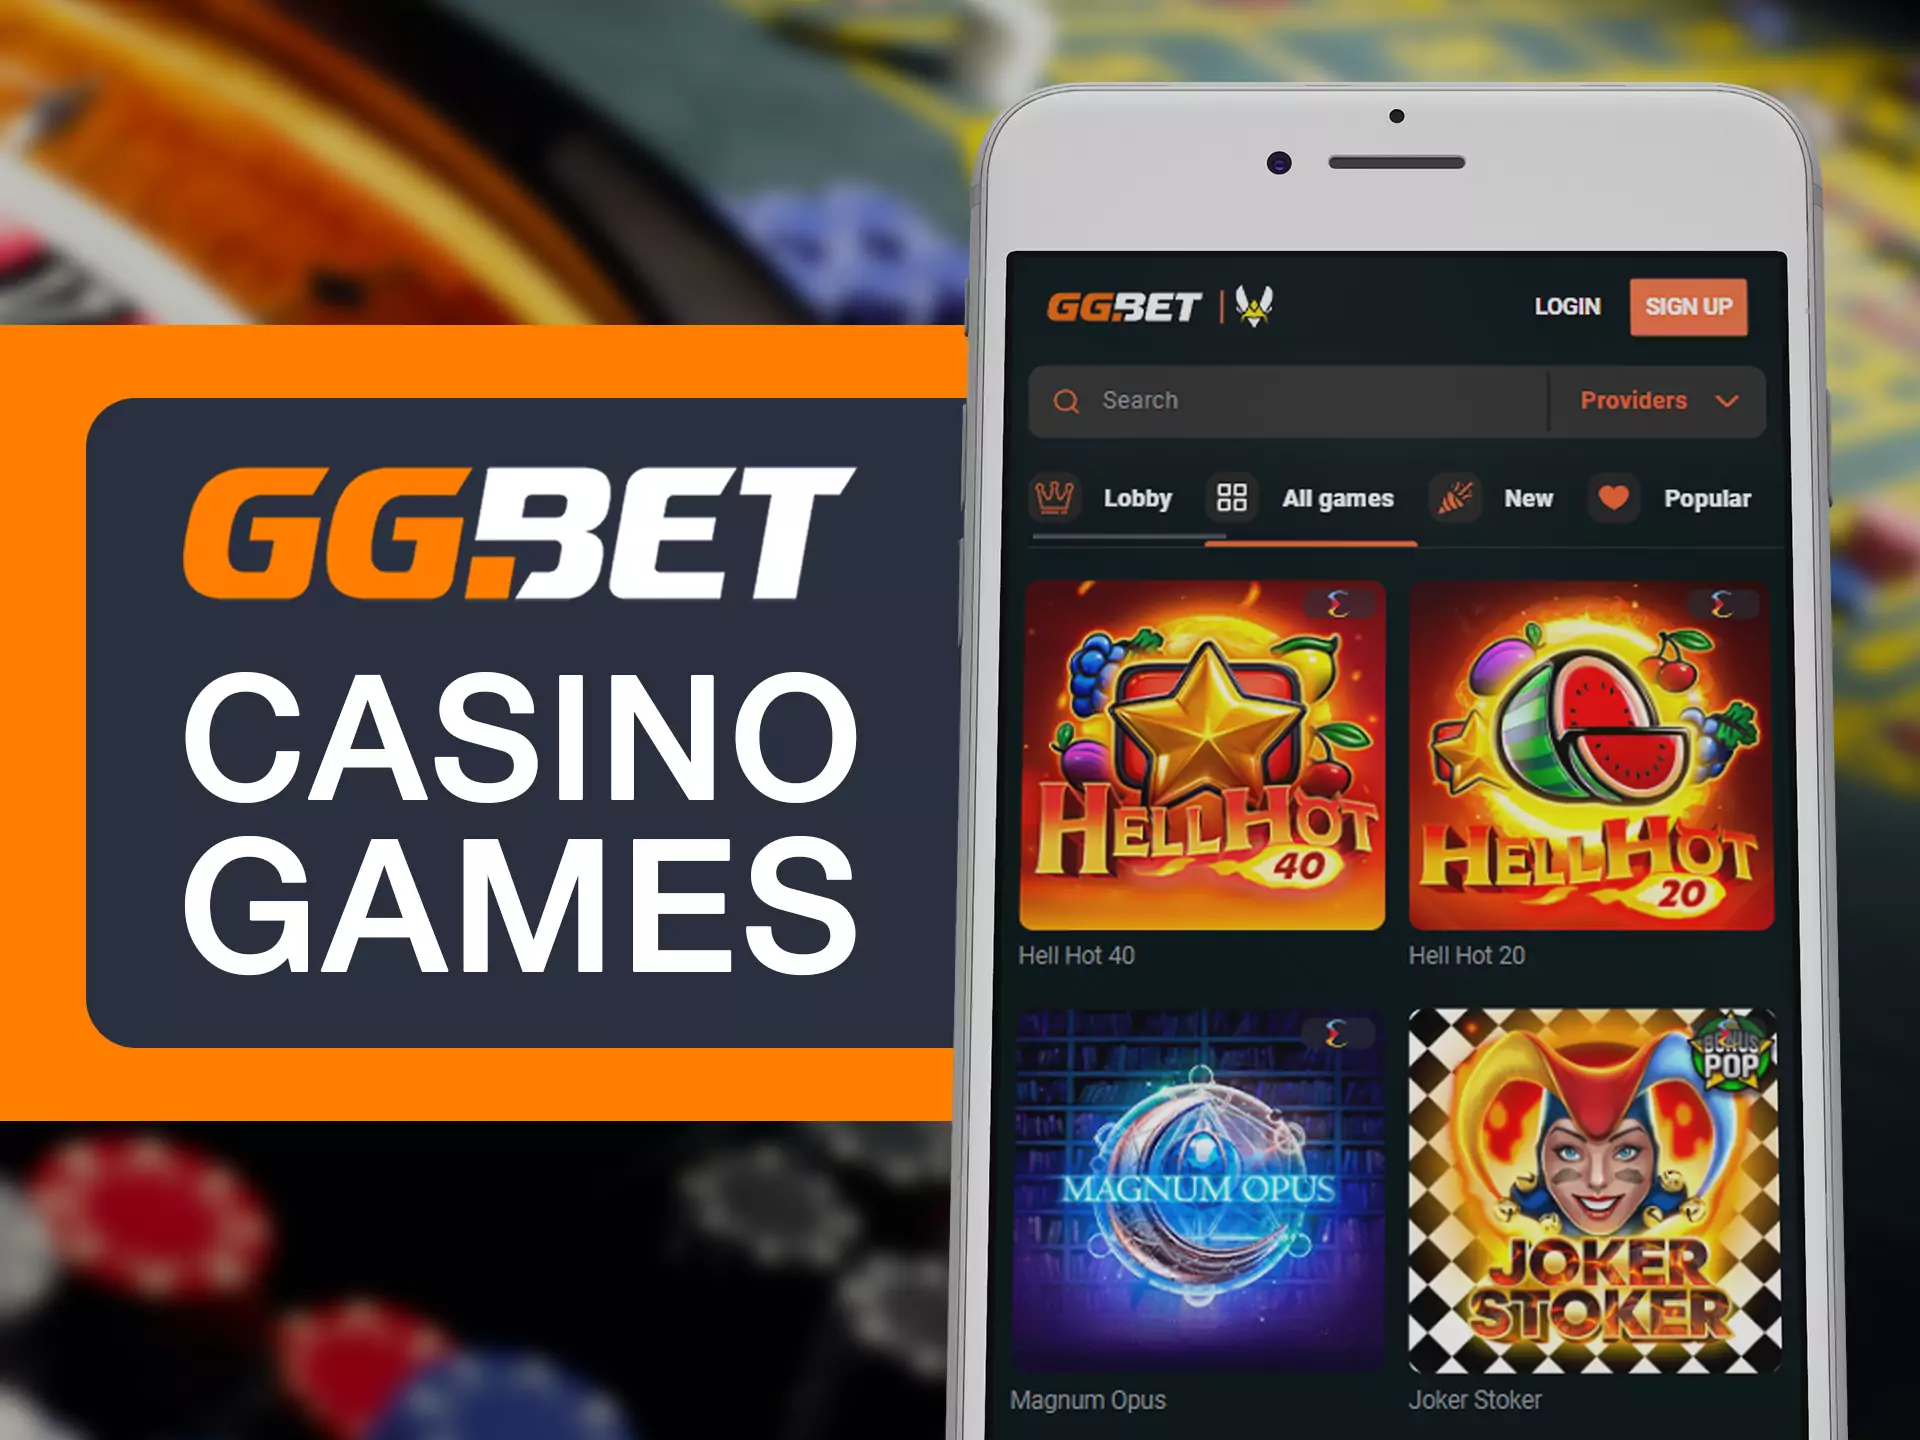 Search for your favourite casino games in GGBet app.